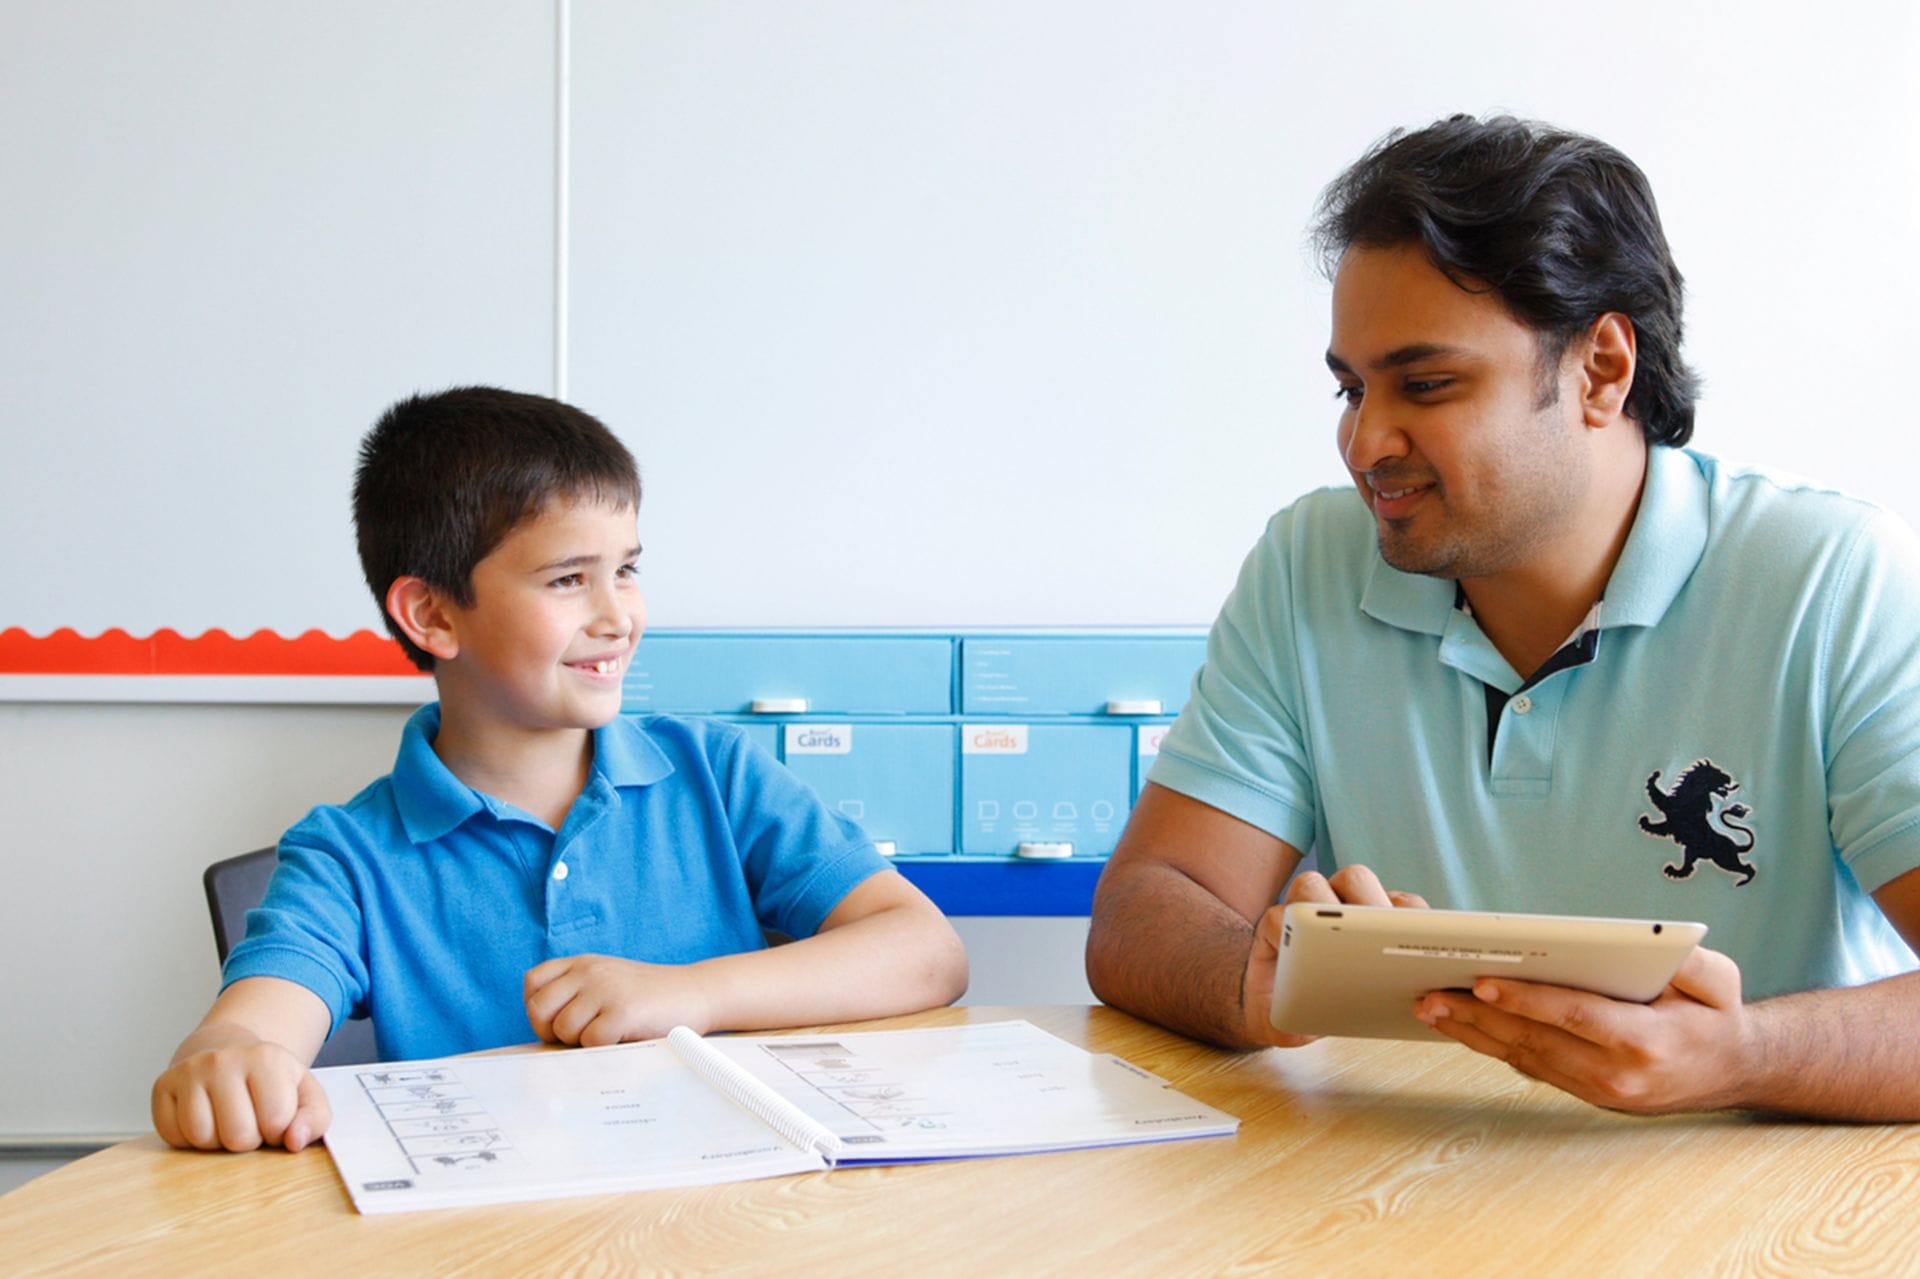 A man and a young boy in matching blue shirts sitting at a table, smiling at each other while using a tablet during an Amplify Tutoring session in a classroom.